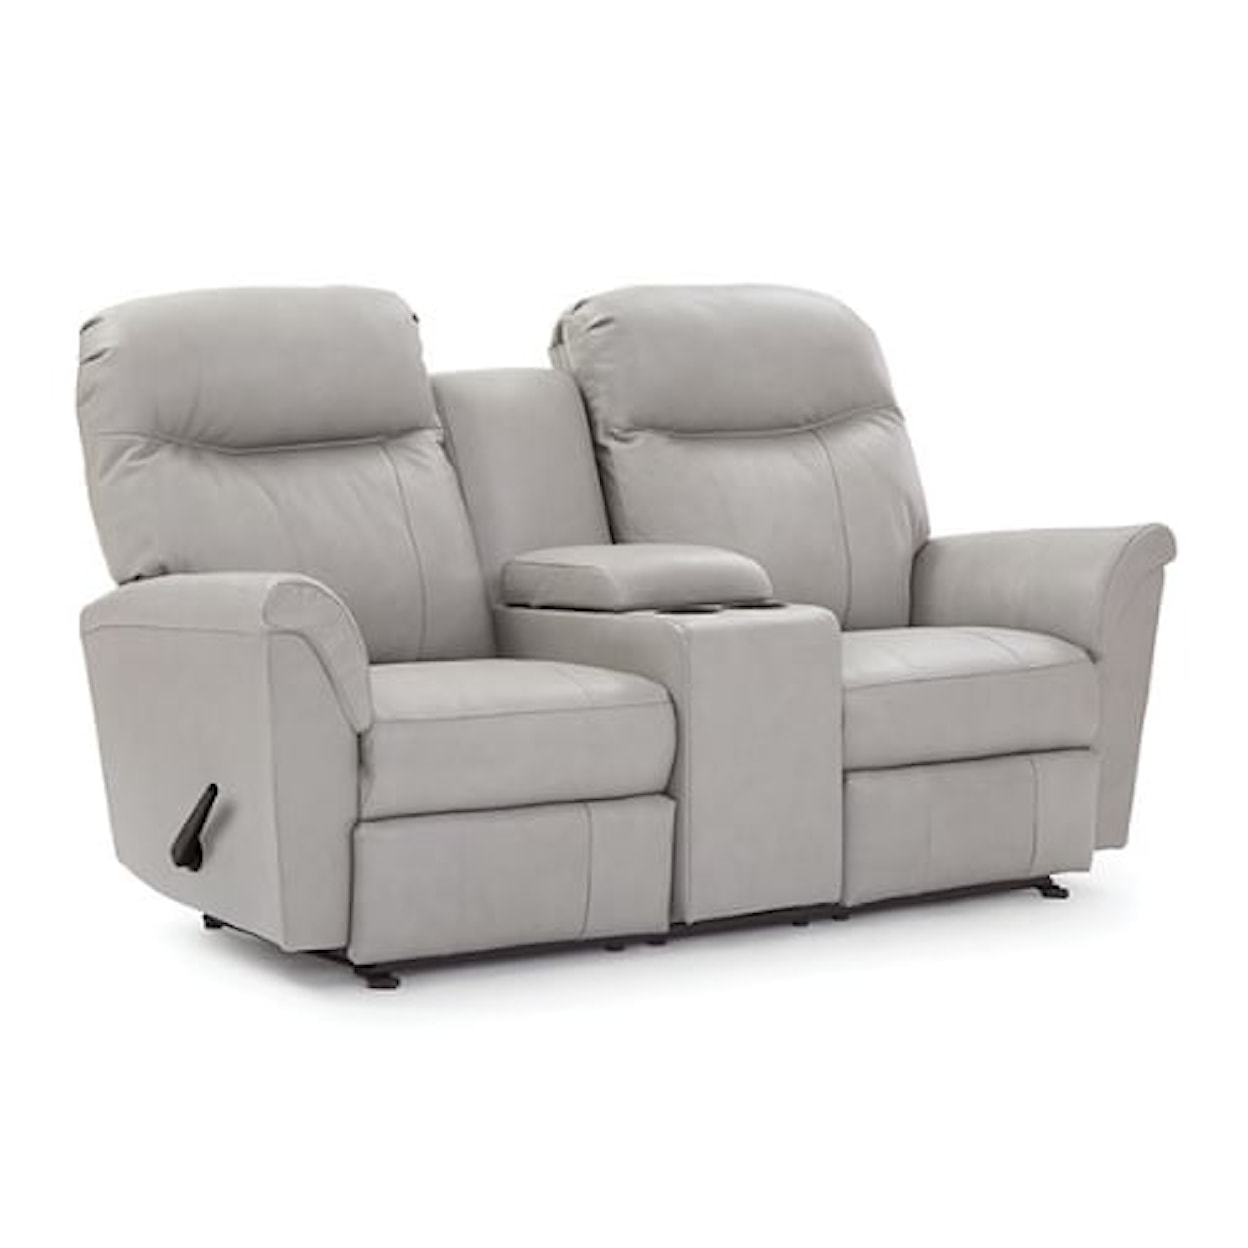 Best Home Furnishings Everlasting Space Saver Console Loveseat